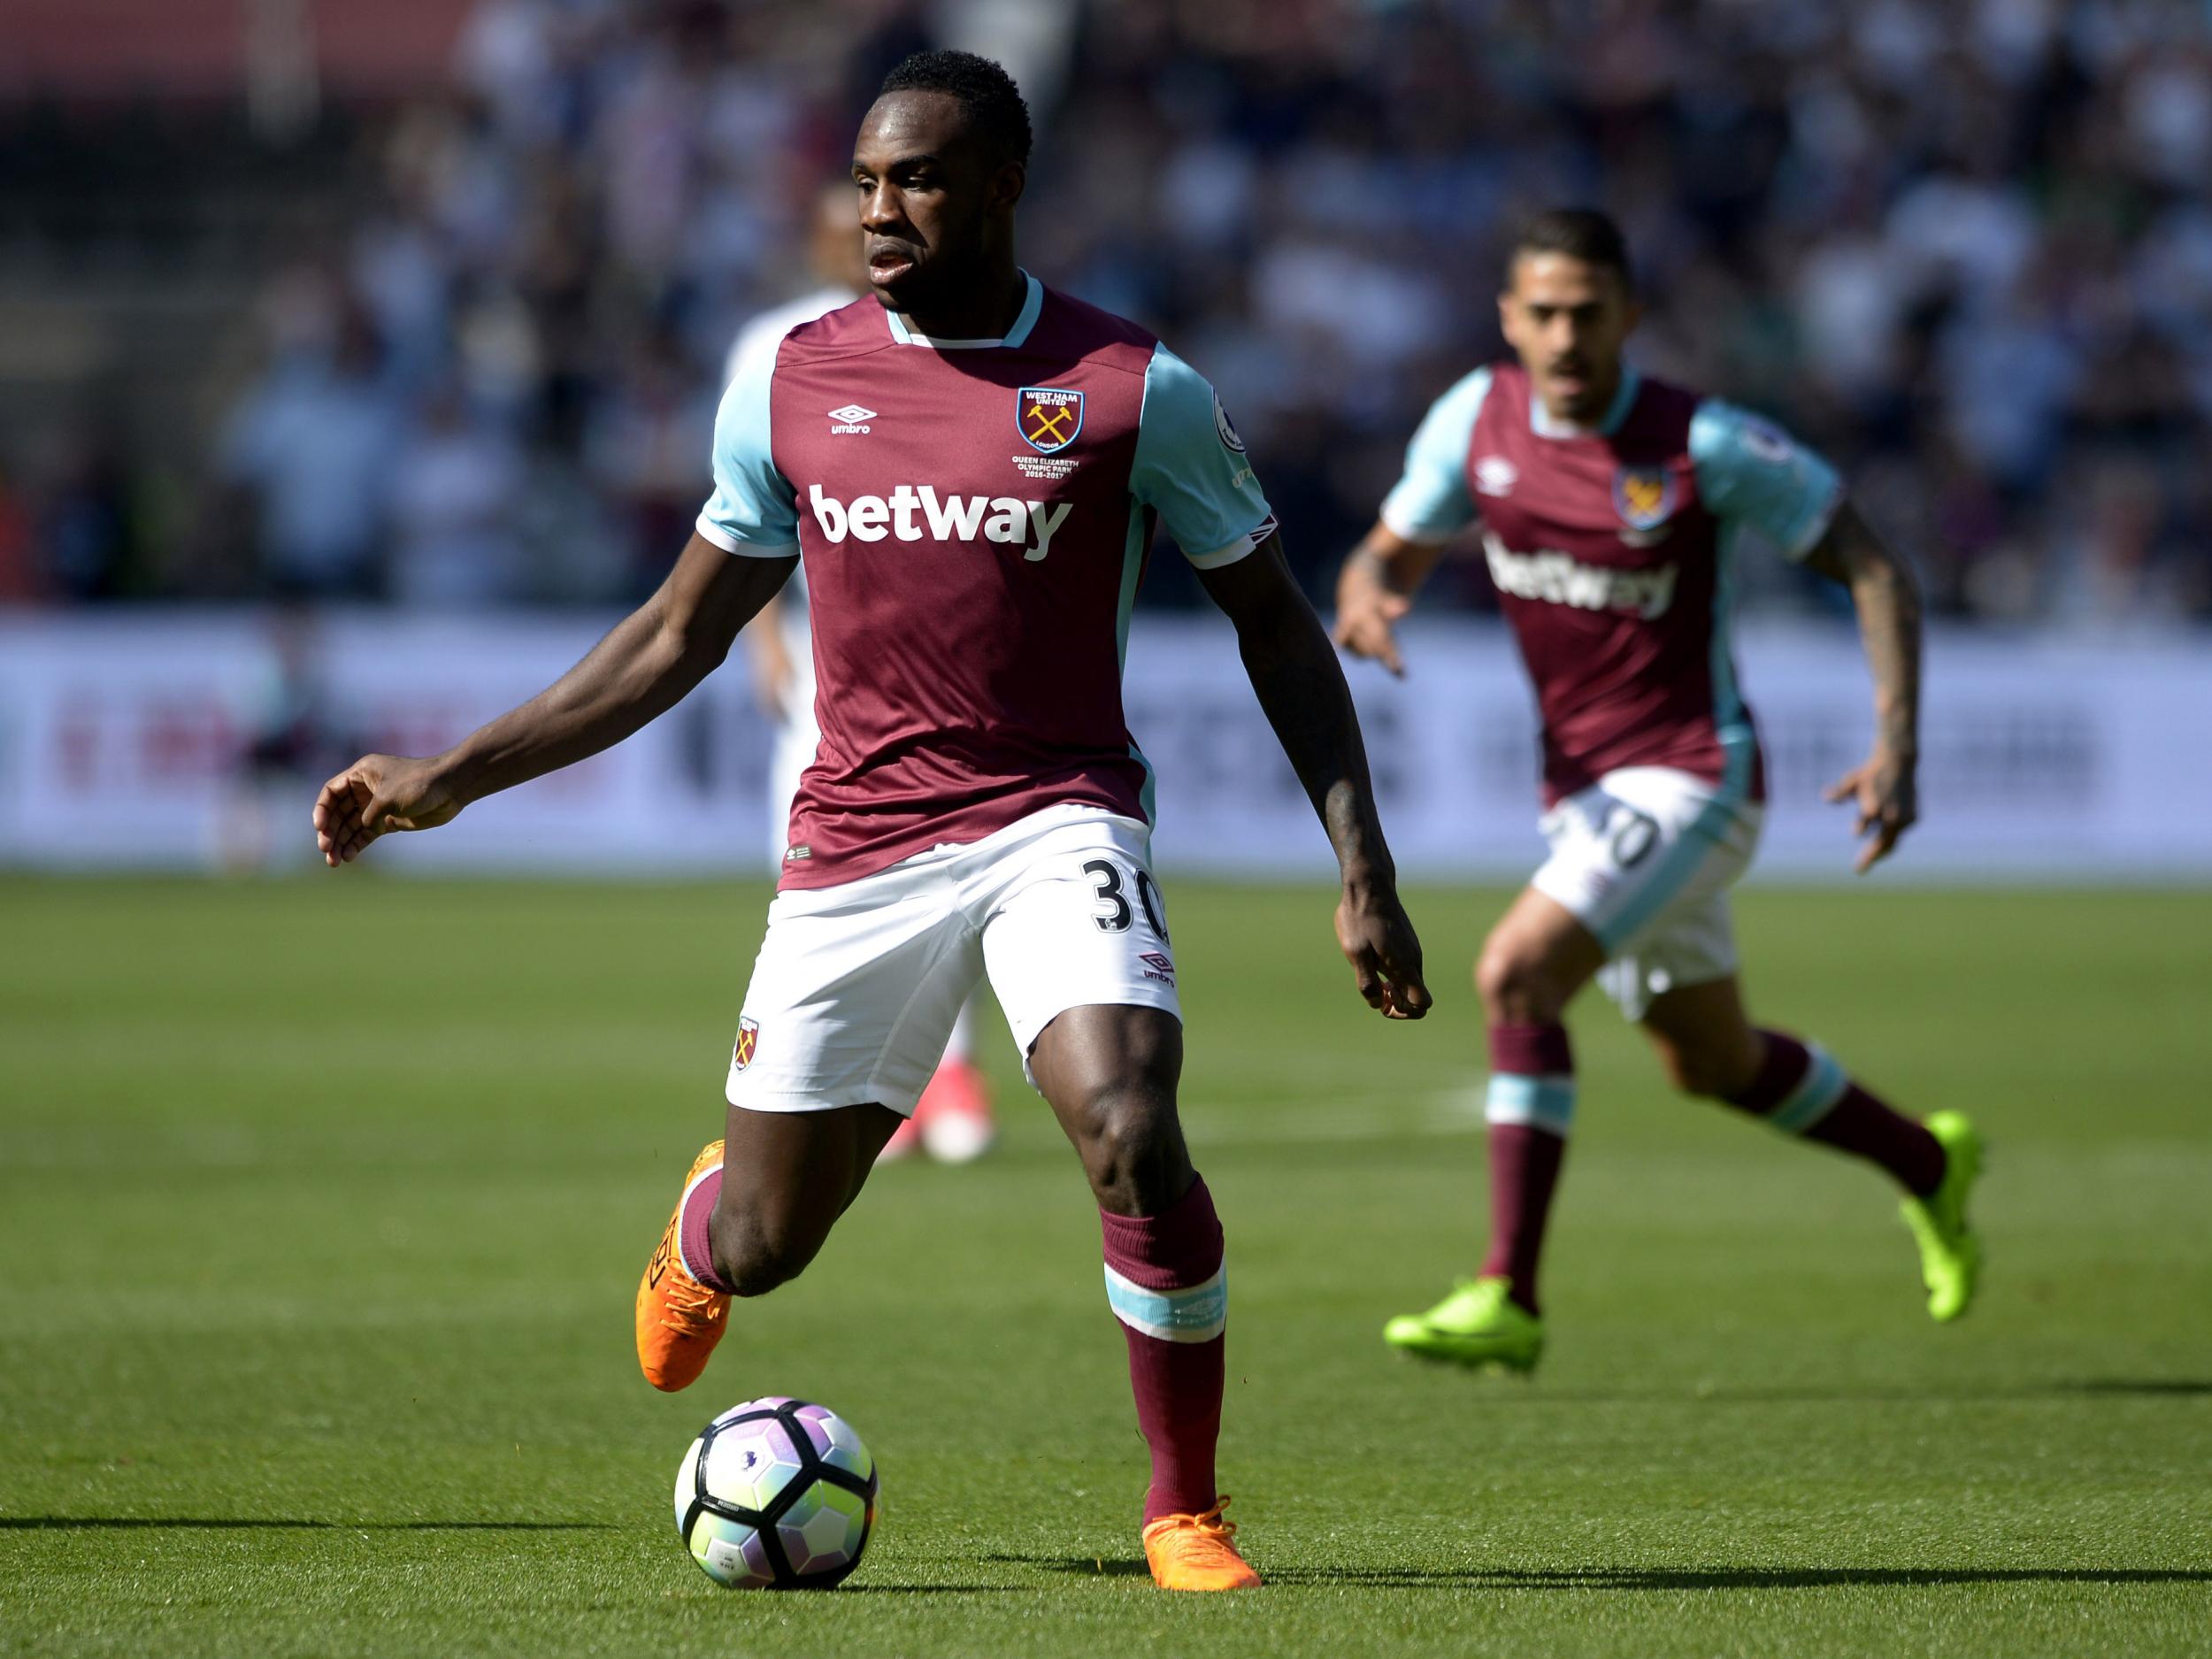 Antonio will stay at the club until 2021